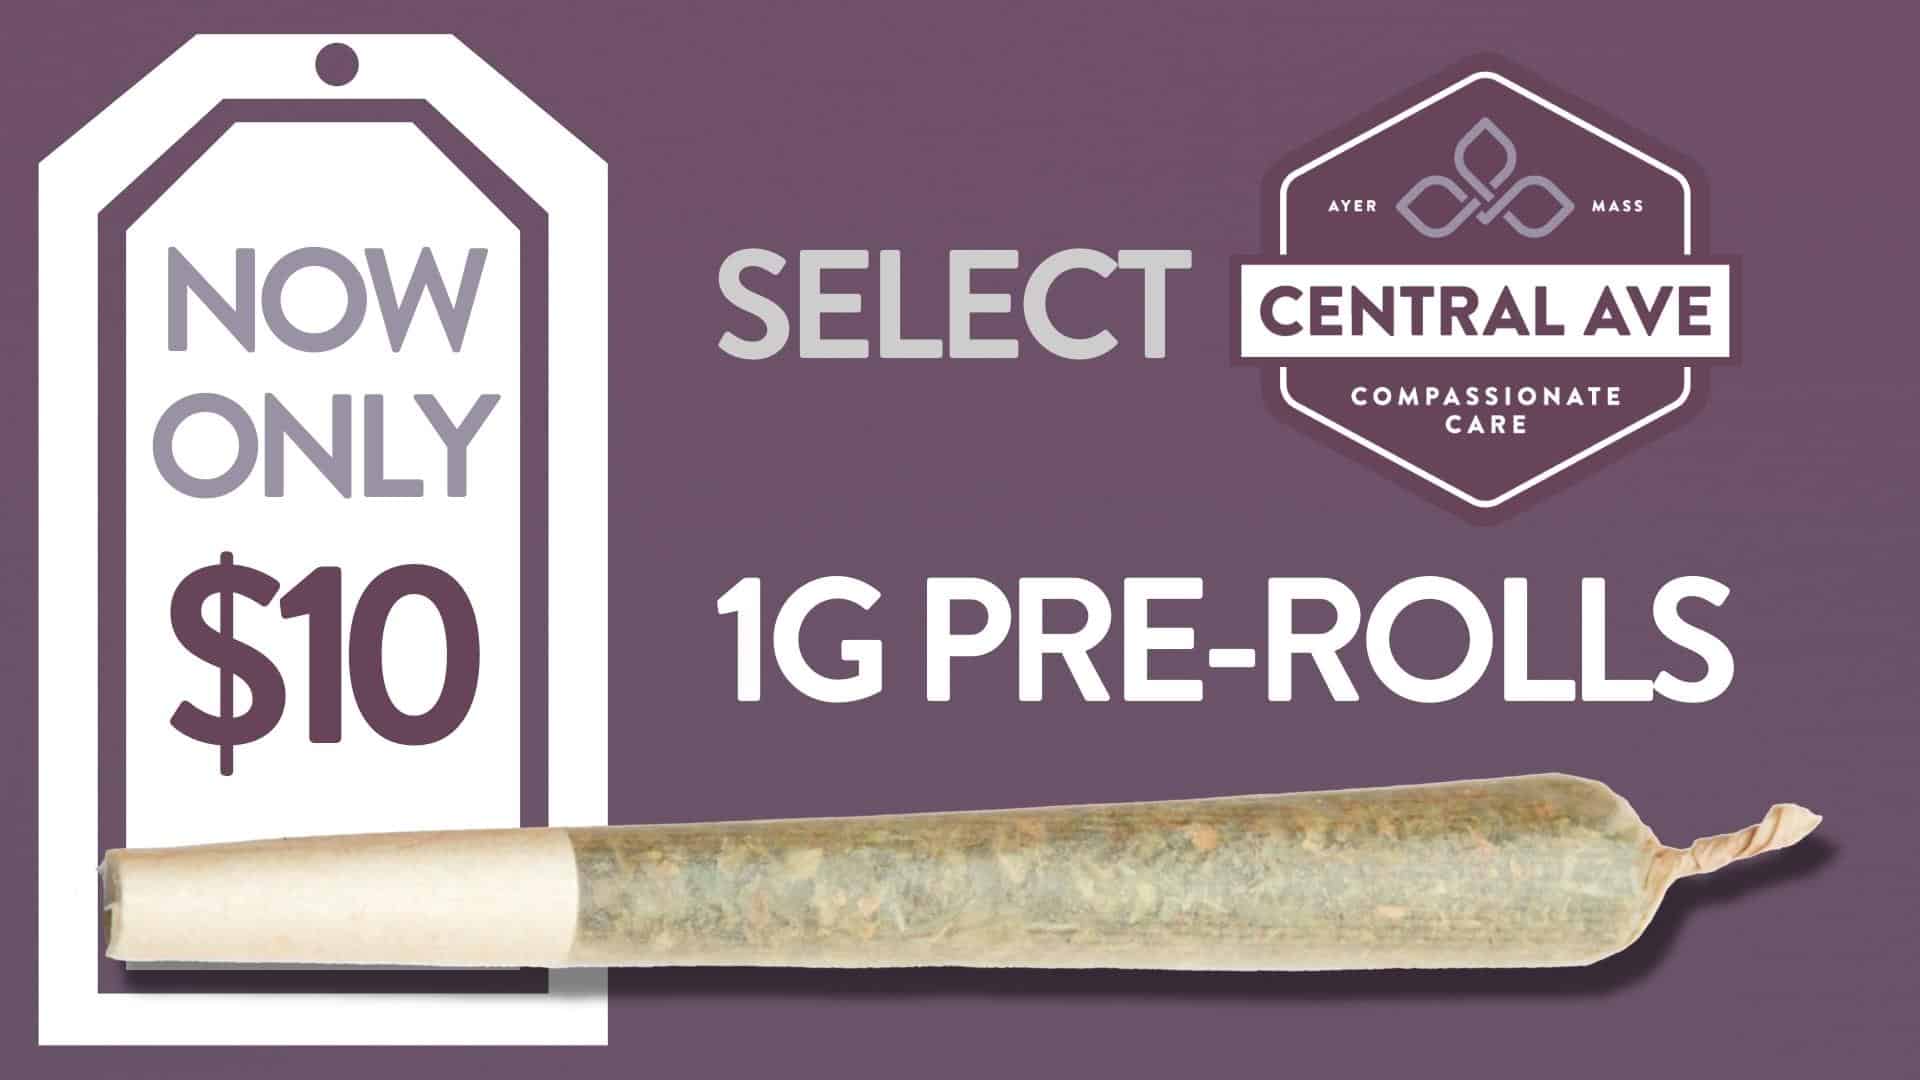 Central Ave $10 PRE-ROLLS